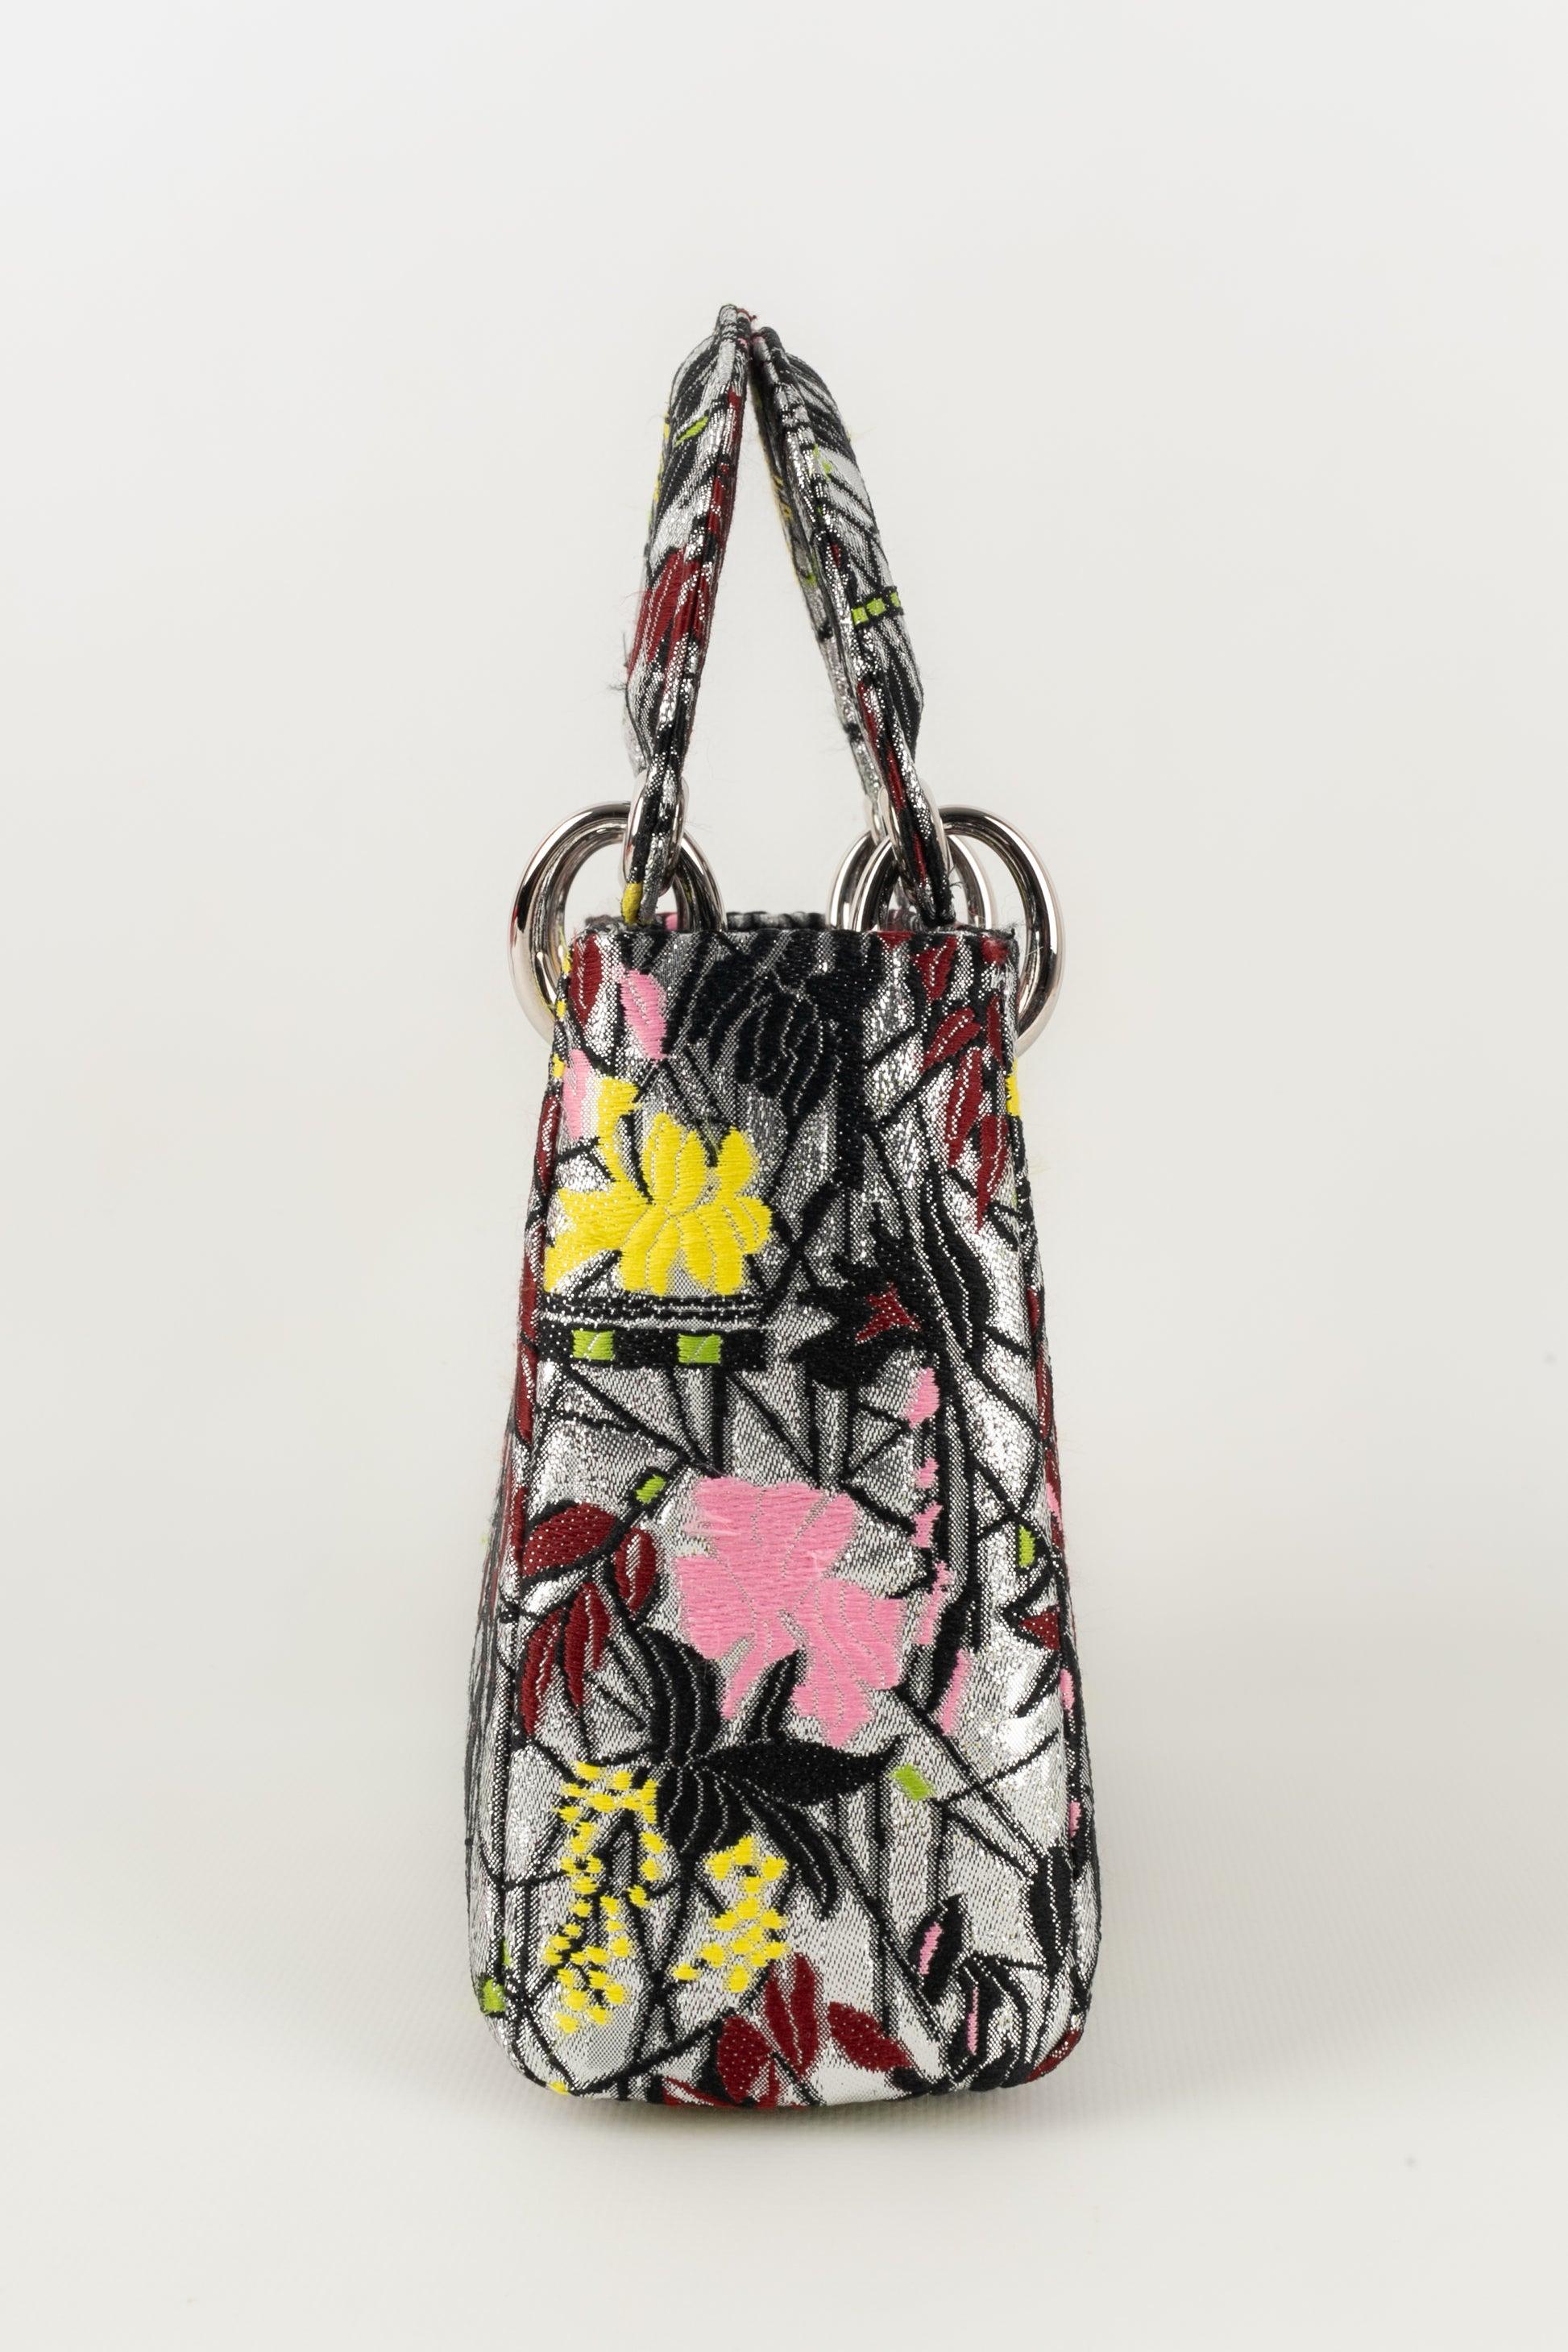 Women's Lady Dior Bag Entirely Embroidered with Lurex and Multicolored Yarns, 2014 For Sale